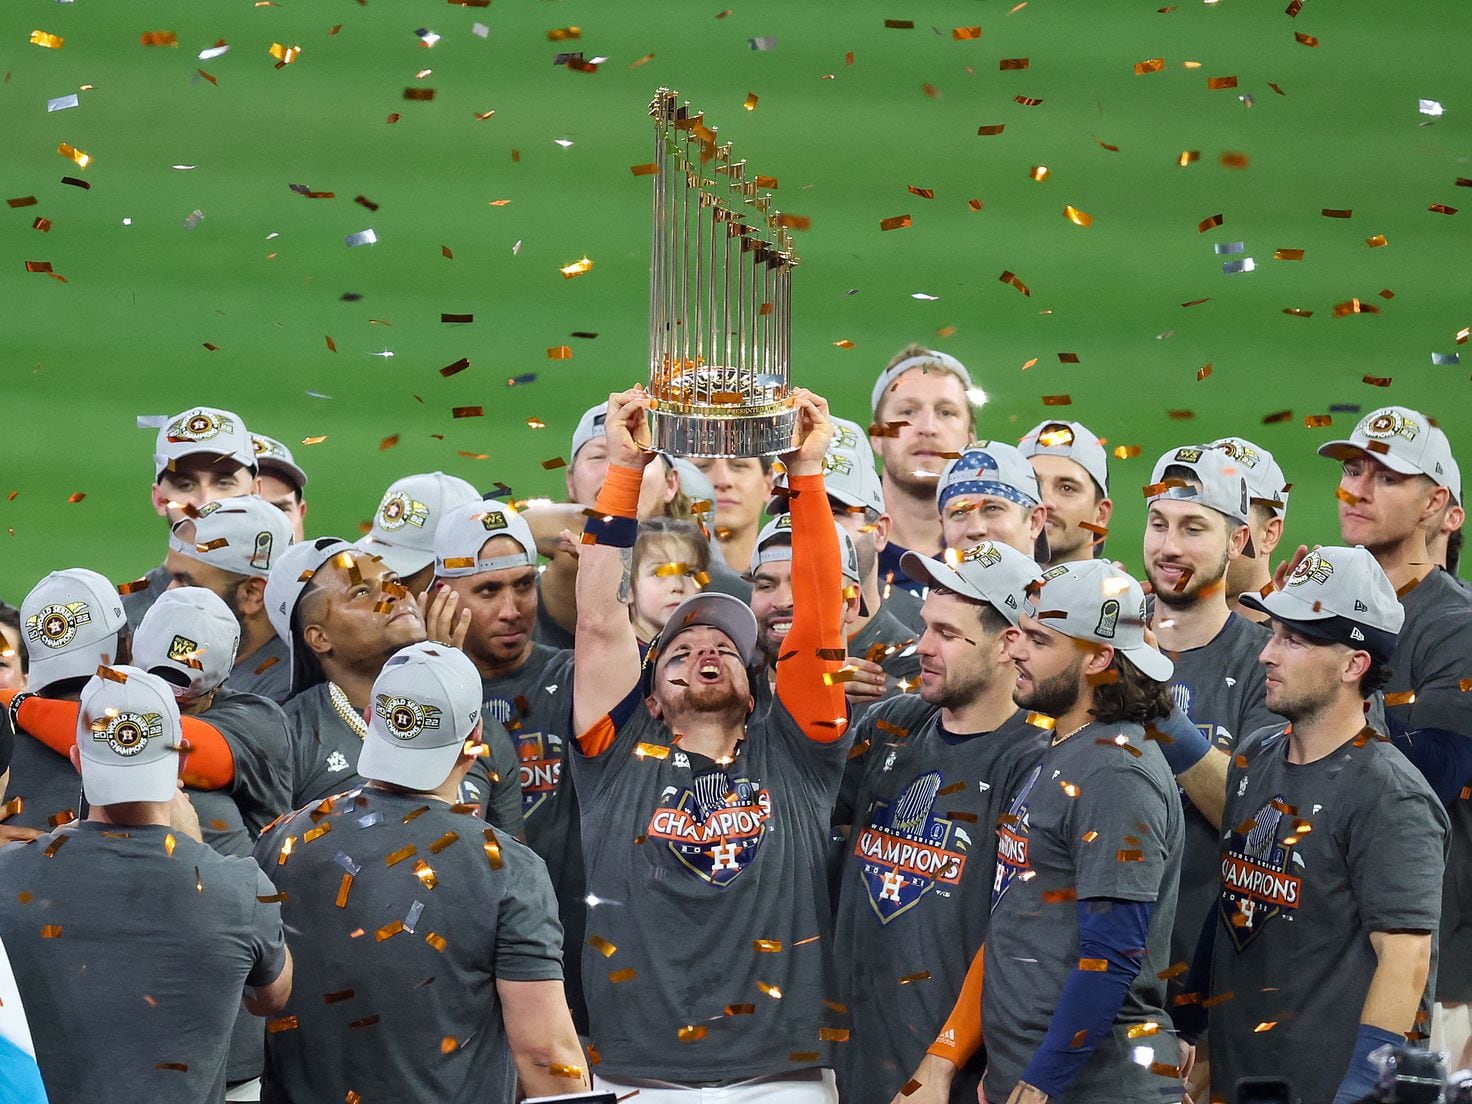 Reaction to the Astros winning the 2022 World Series!